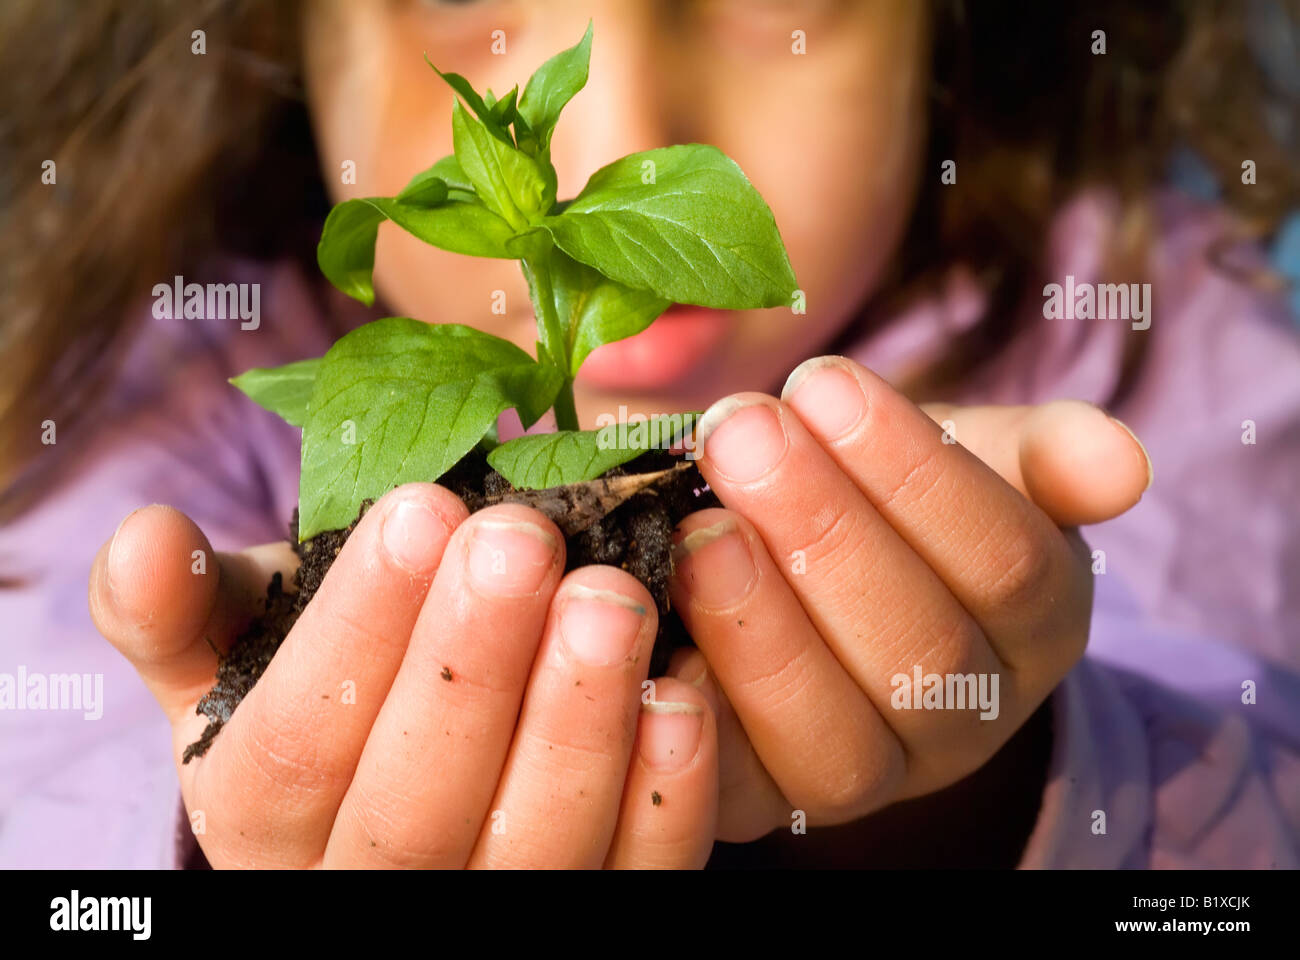 close up of little girls hands holding plant Stock Photo